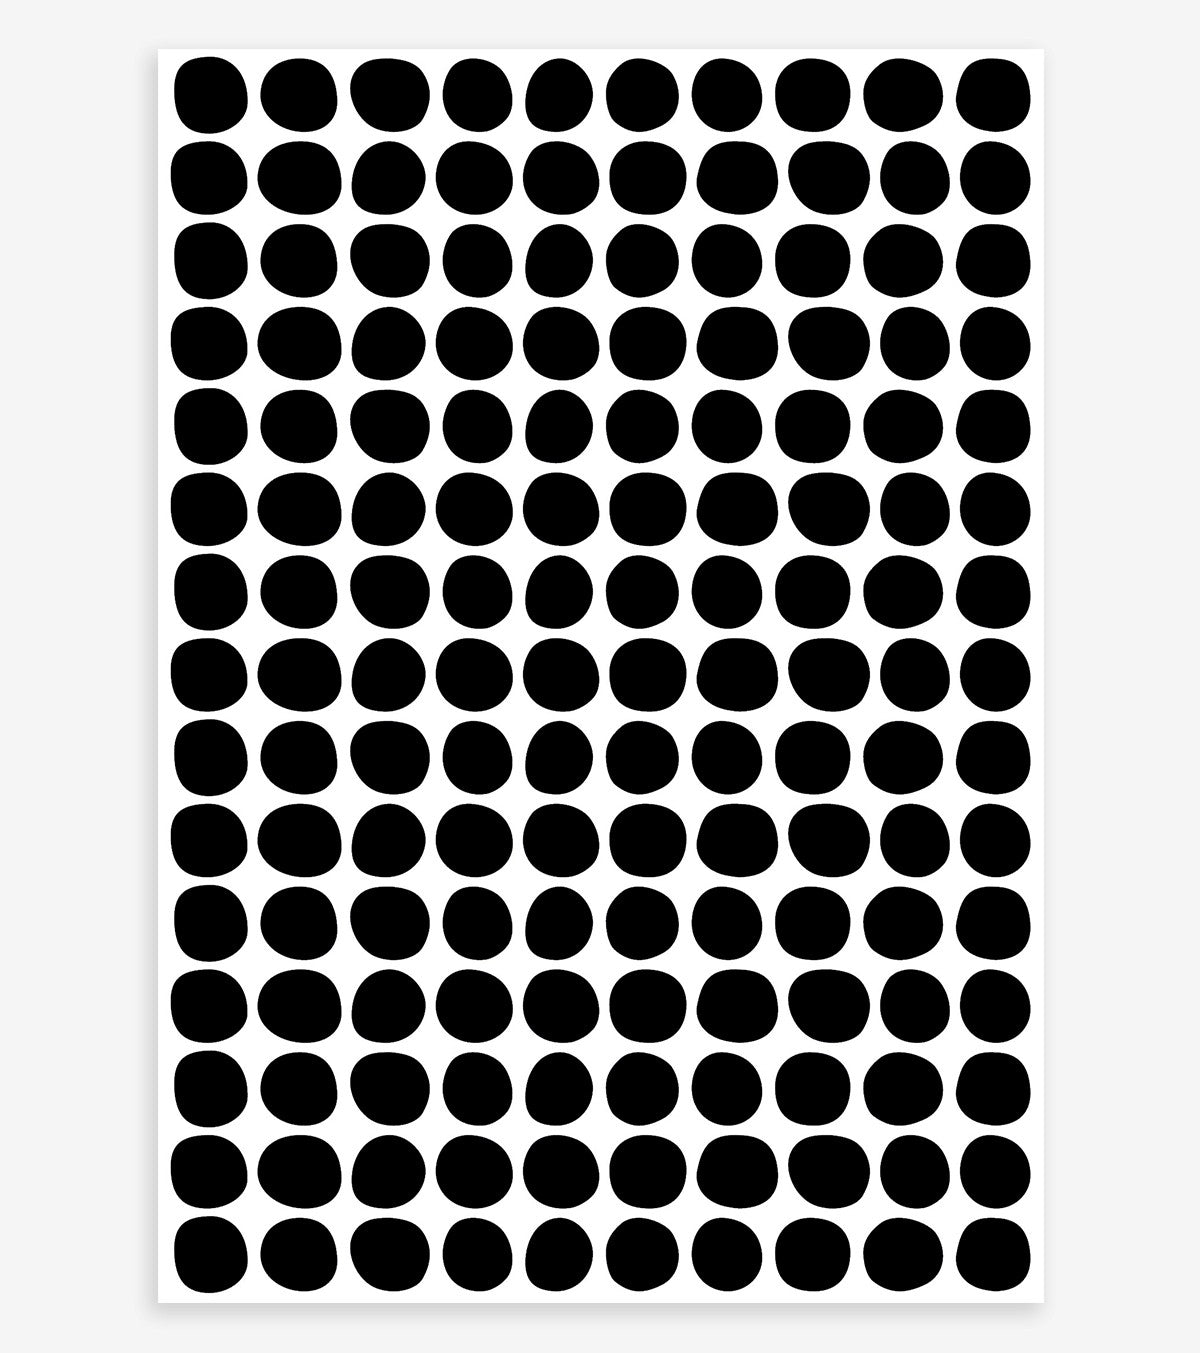 The basics - Wall decals muraux - Pois